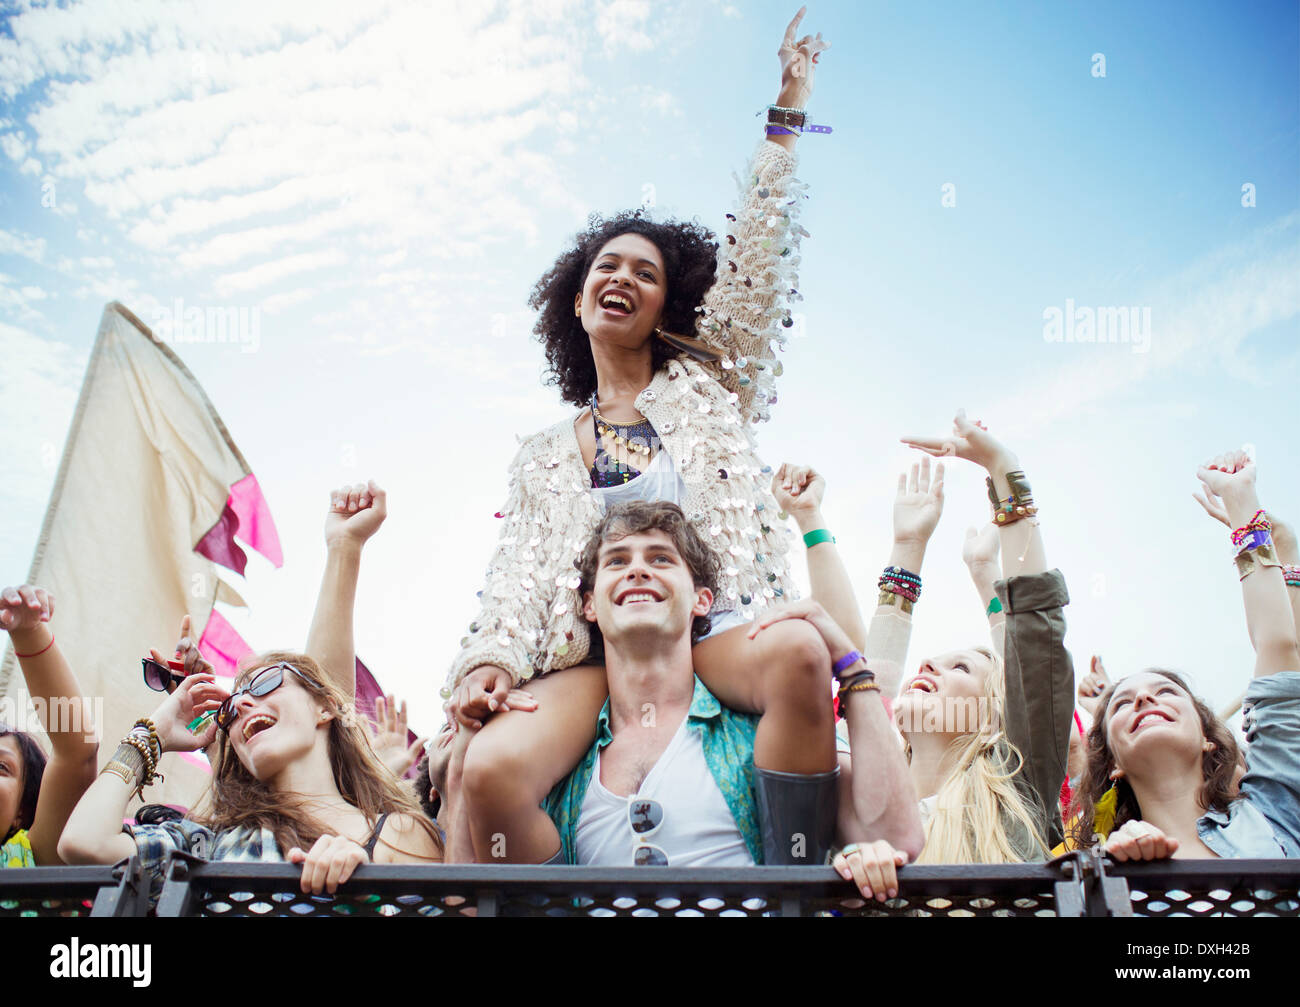 Cheering woman on manÍs shoulders at music festival Stock Photo